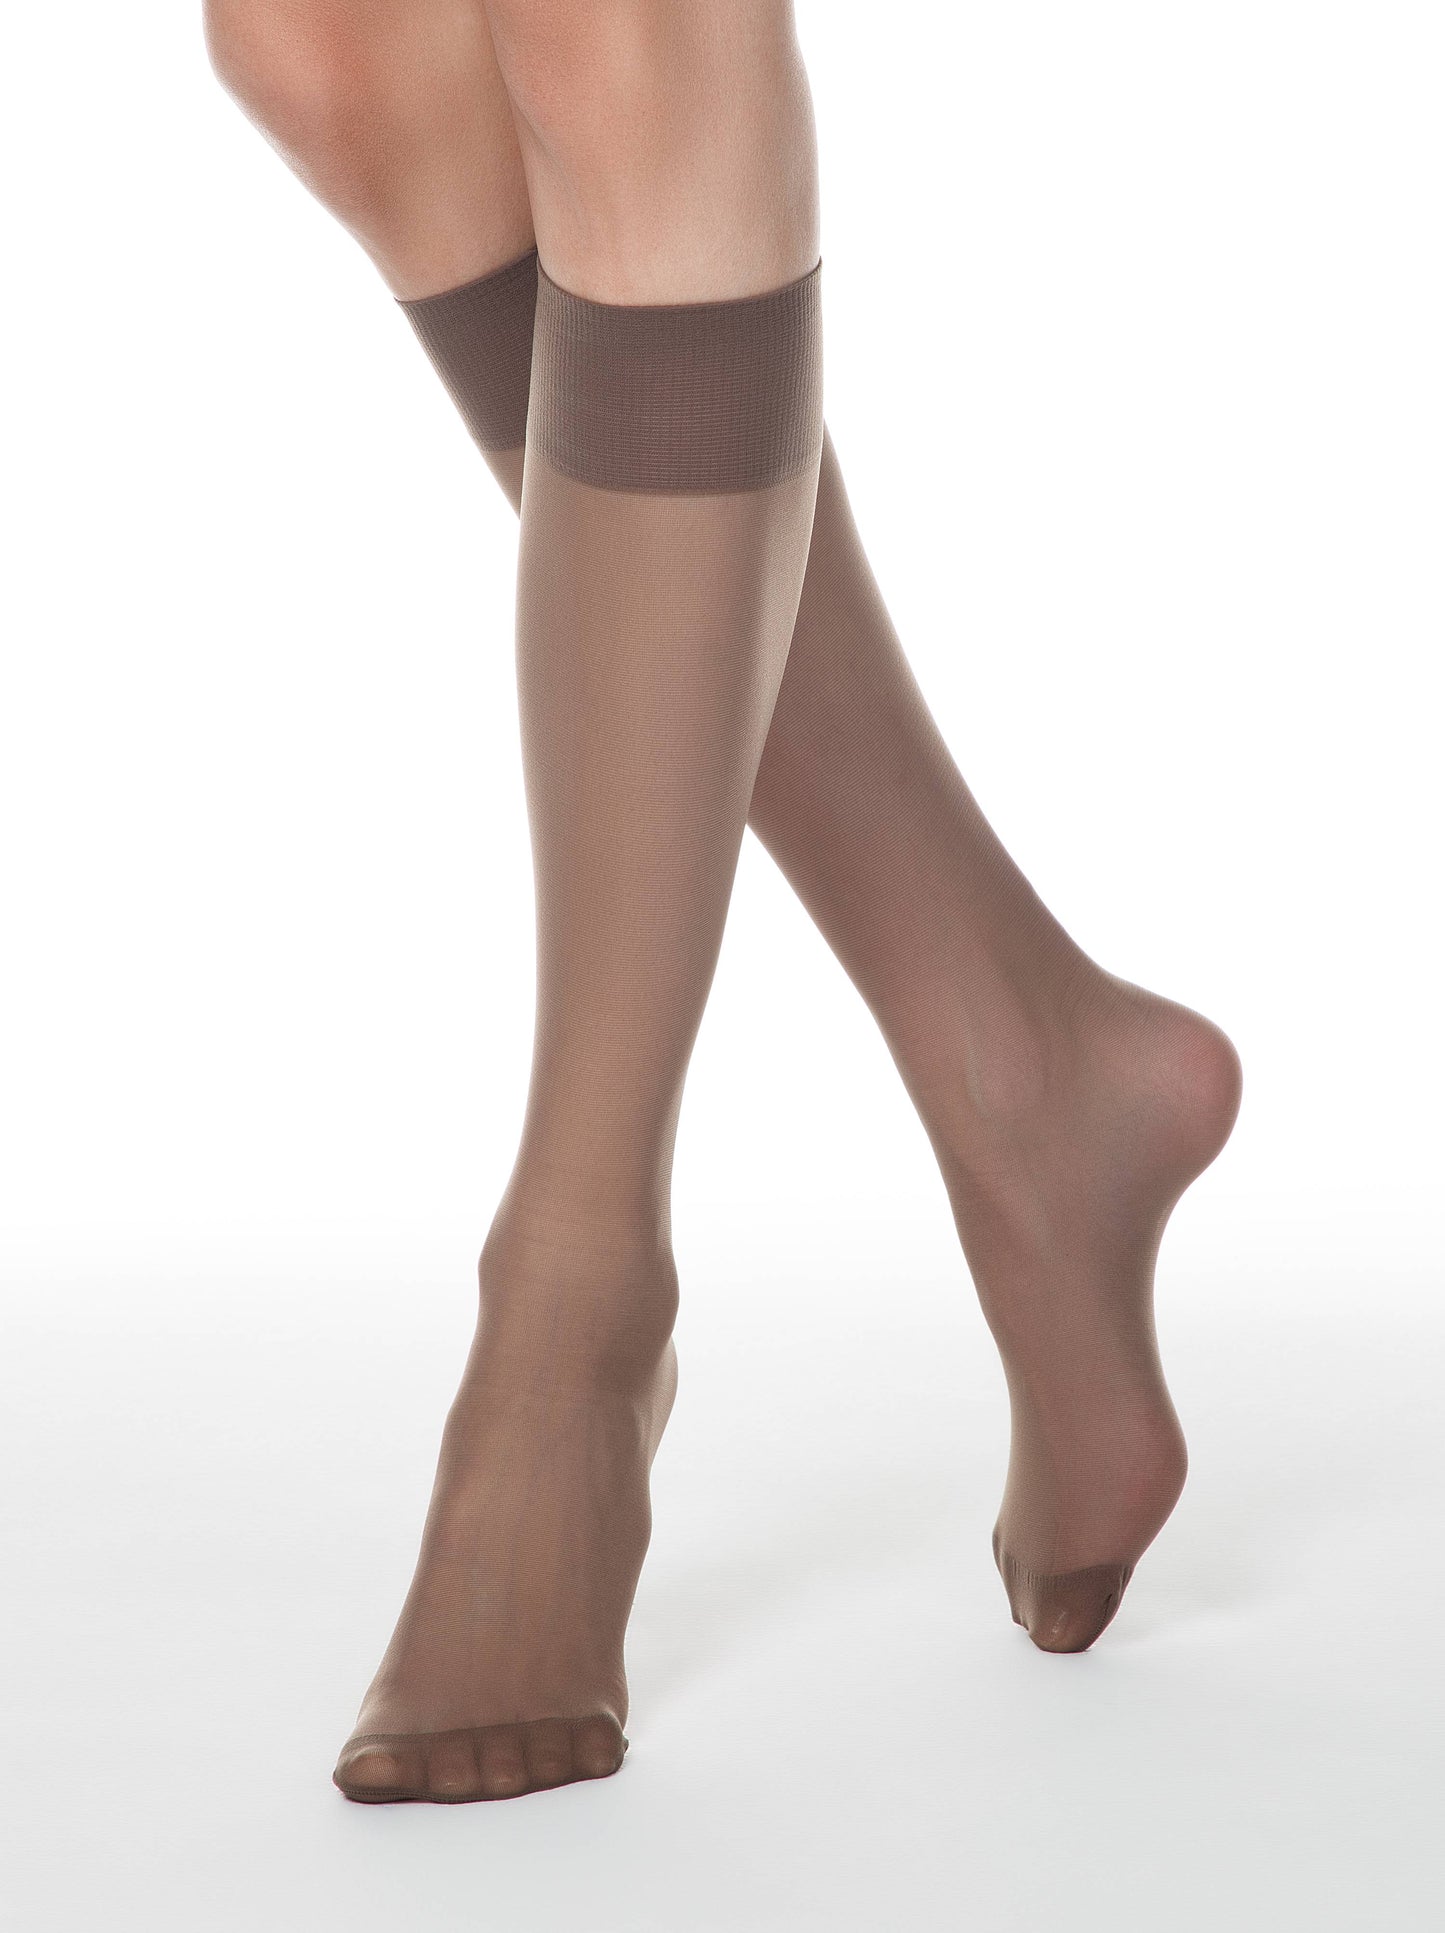 Conte Tension 20 Den - Thin Classic Knee-Highs For Women - 2 Pairs (Pack) (8С-3СП)